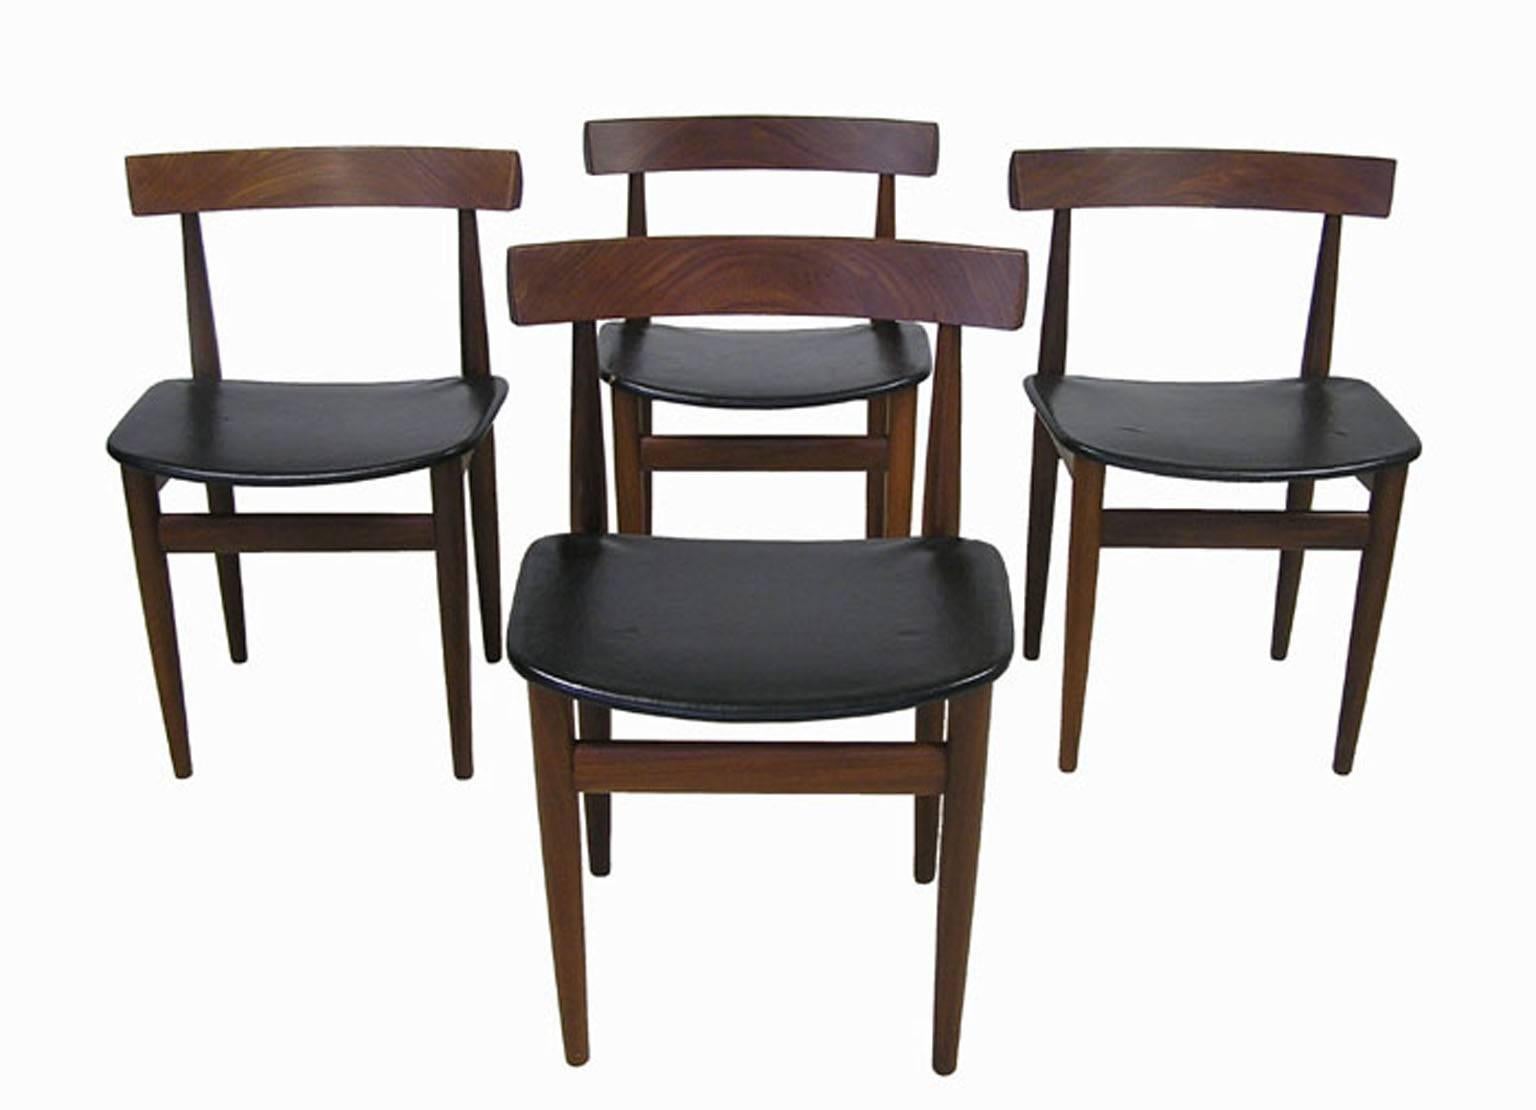 1960s Hans Olsen Teak Dining Table and Chairs, Denmark In Good Condition In Winnipeg, Manitoba